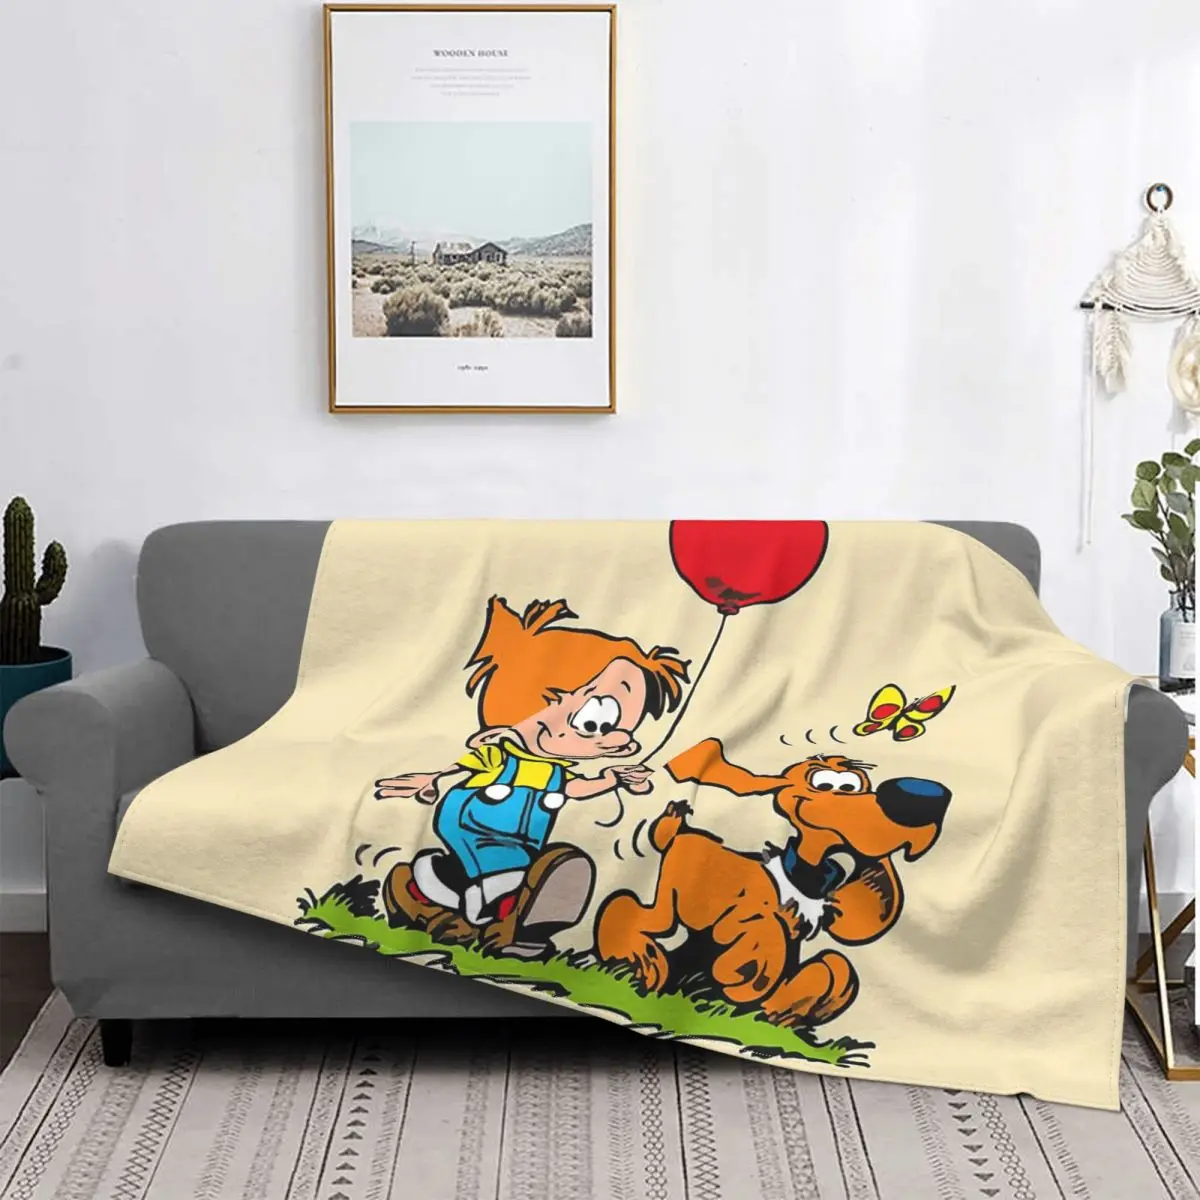 

Belgium Comic Blanket Flannel Decoration Boule Et Bill Billy And Buddy Yellow Portable Home Bedspread